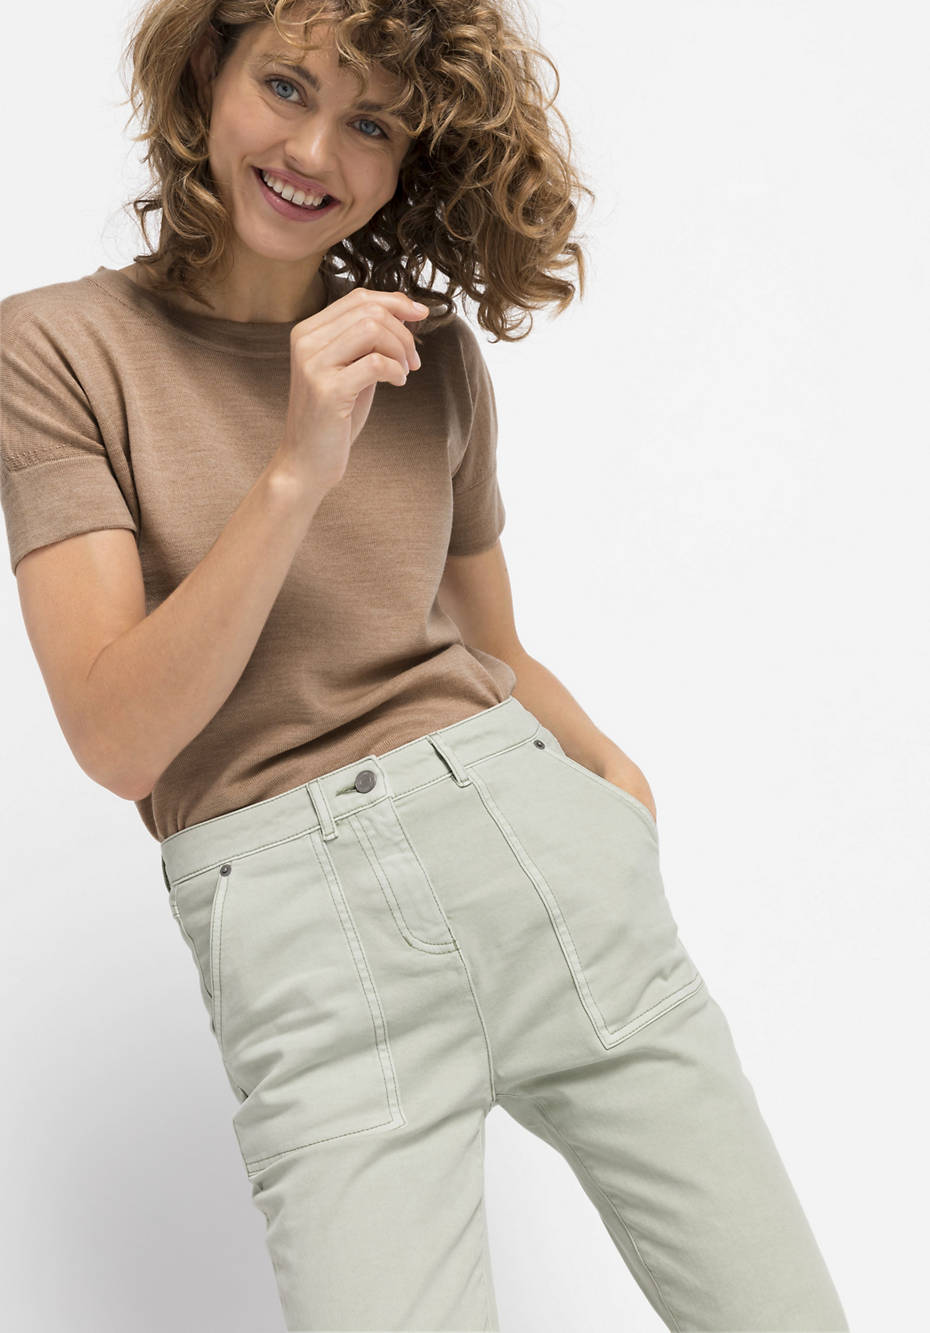 Limited by Nature pants made of organic cotton